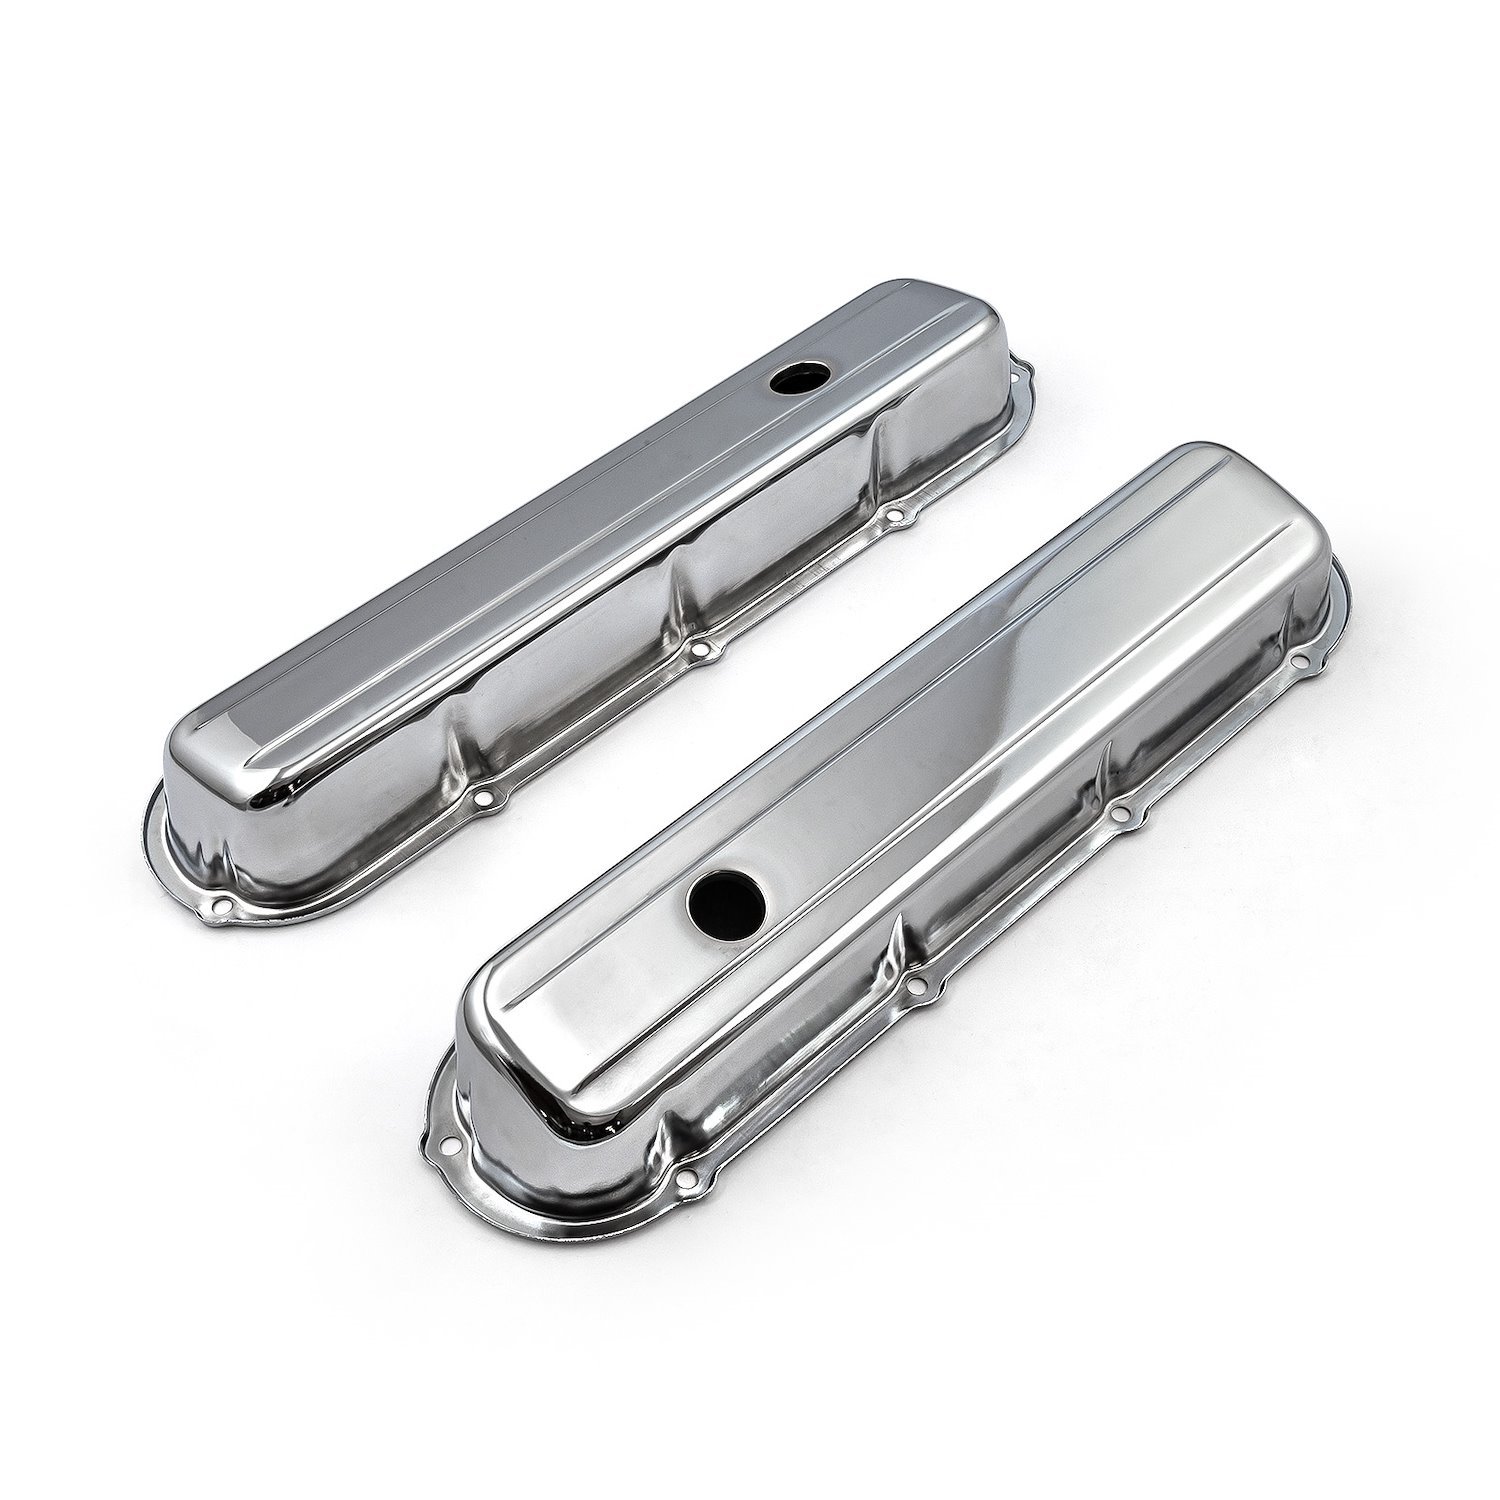 Stock Steel Valve Covers for 1968-1984 Cadillac 368, 425, 500 [Short w/ Breather Hole]